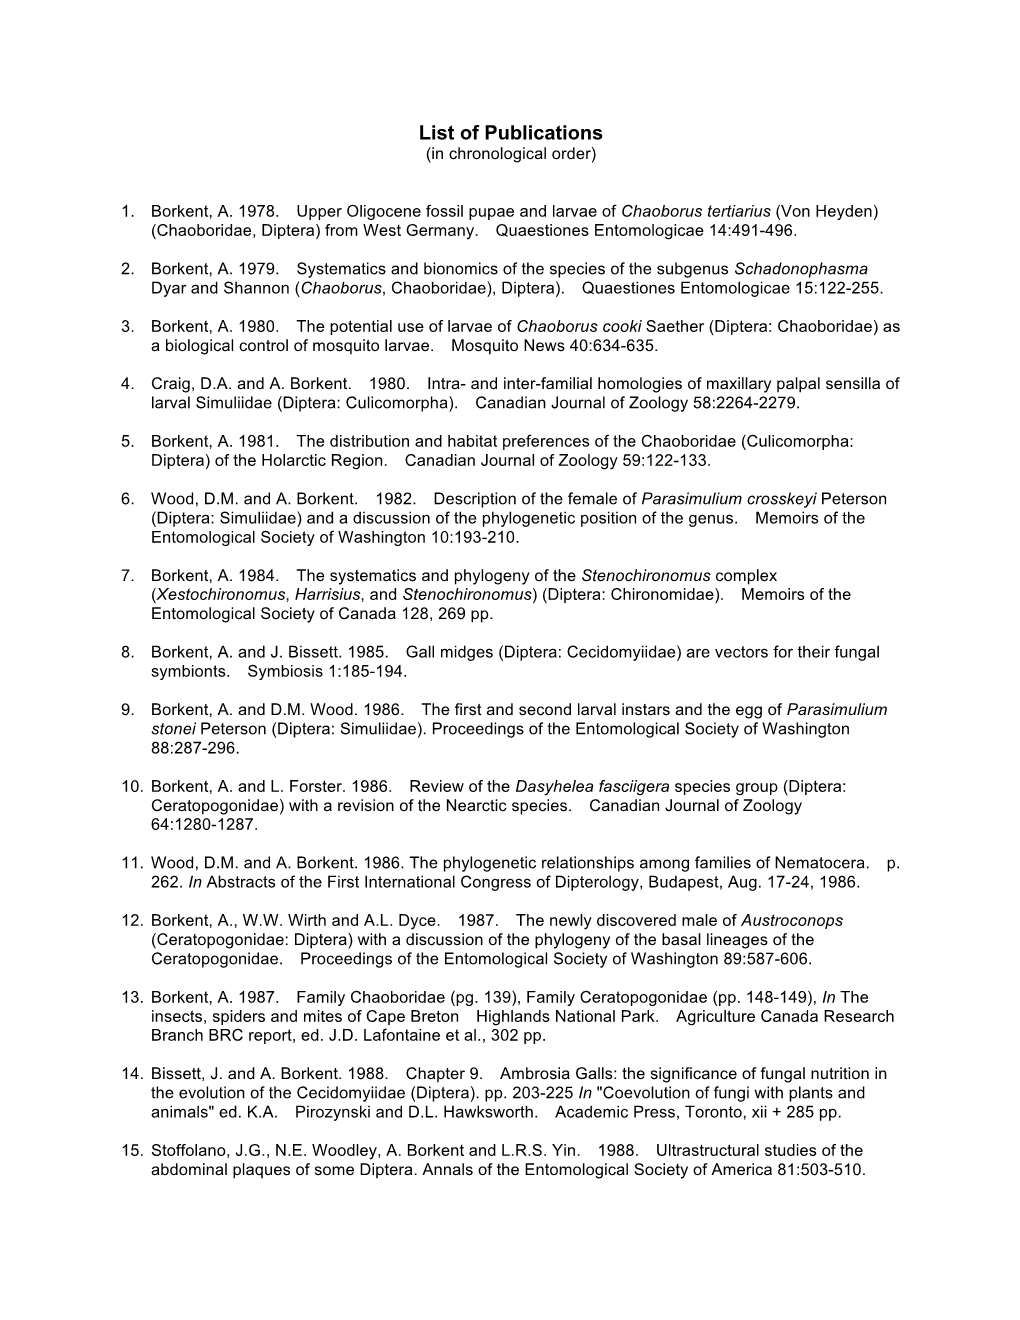 List of Publications (In Chronological Order)